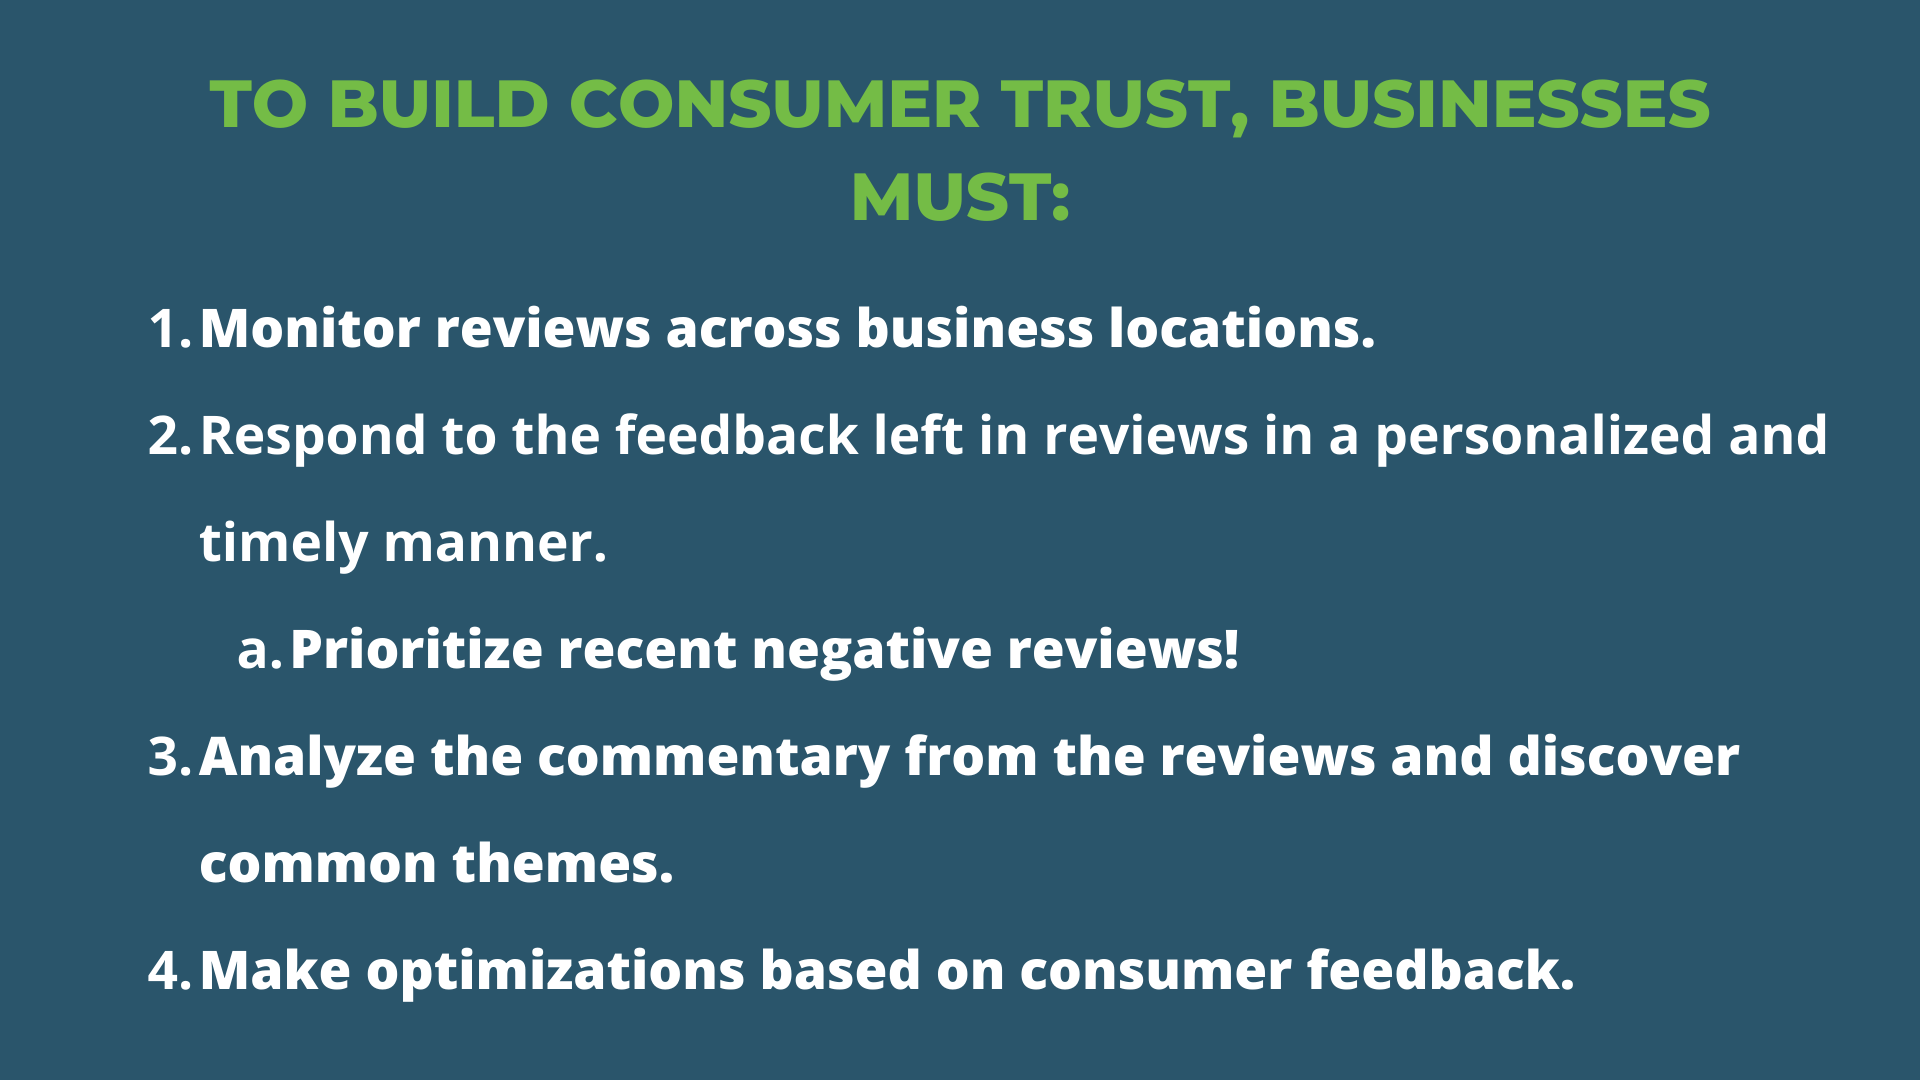 A blue background with white text highlighting four things businesses must do to build consumer trust